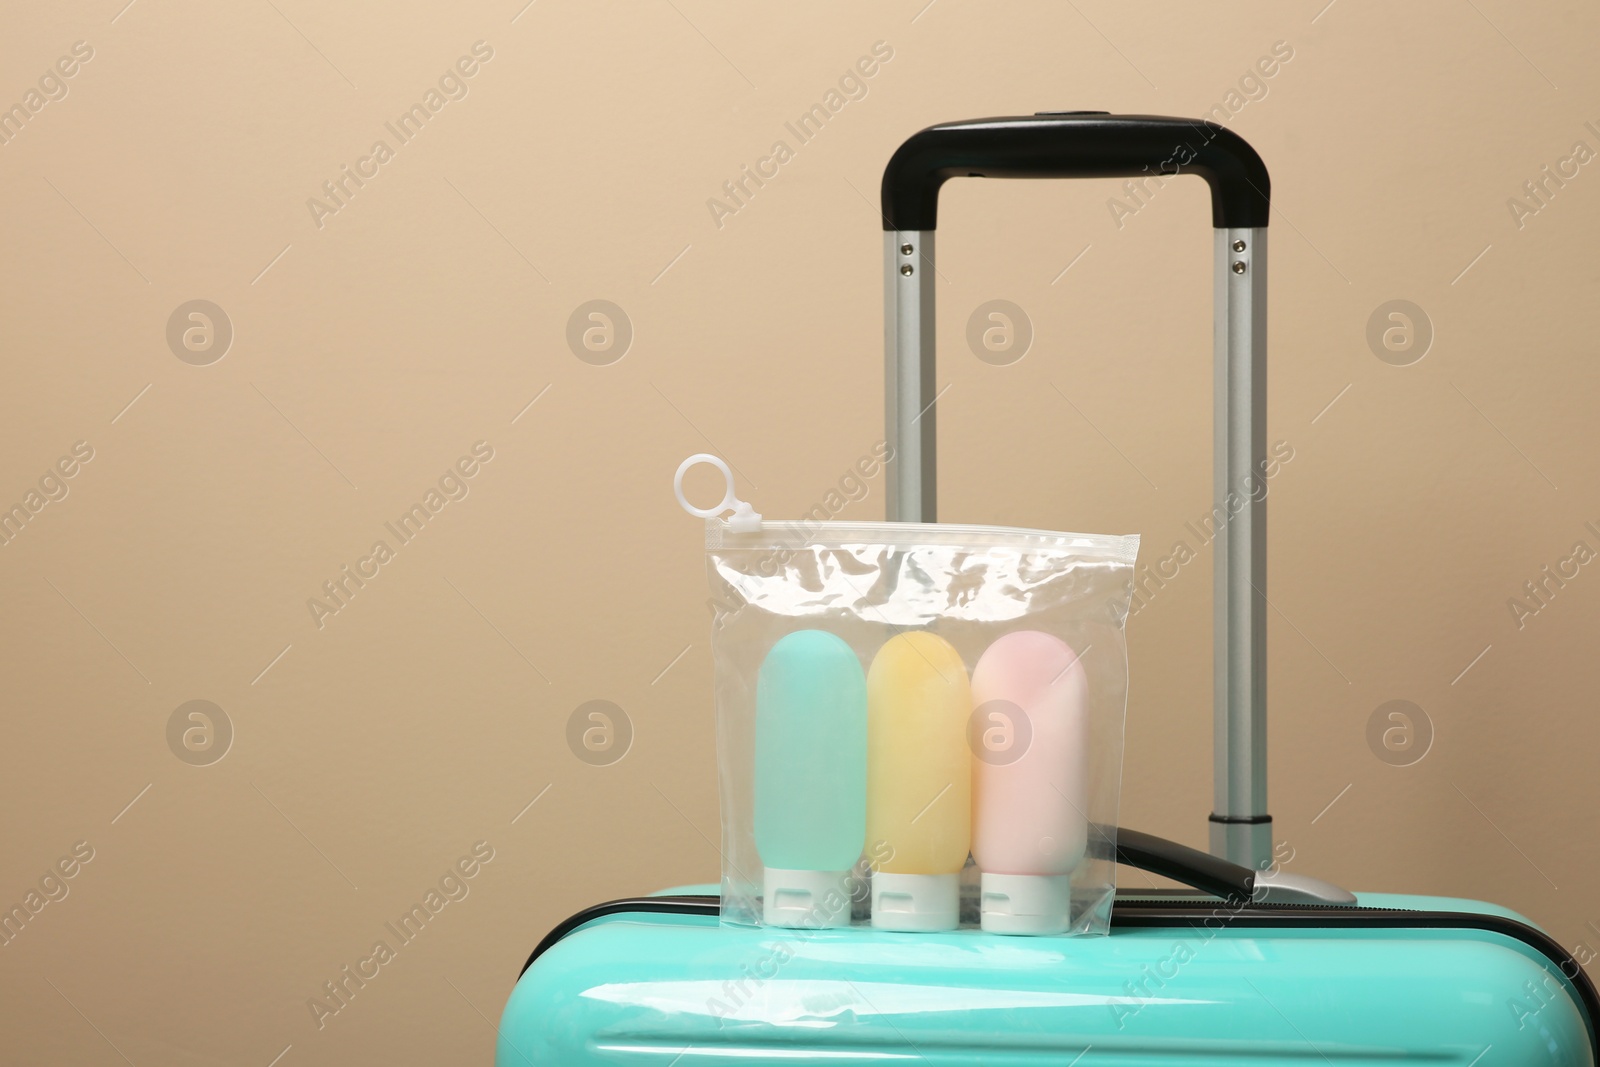 Photo of Cosmetic travel kit in plastic bag on suitcase against beige wall, space for text. Bath accessories